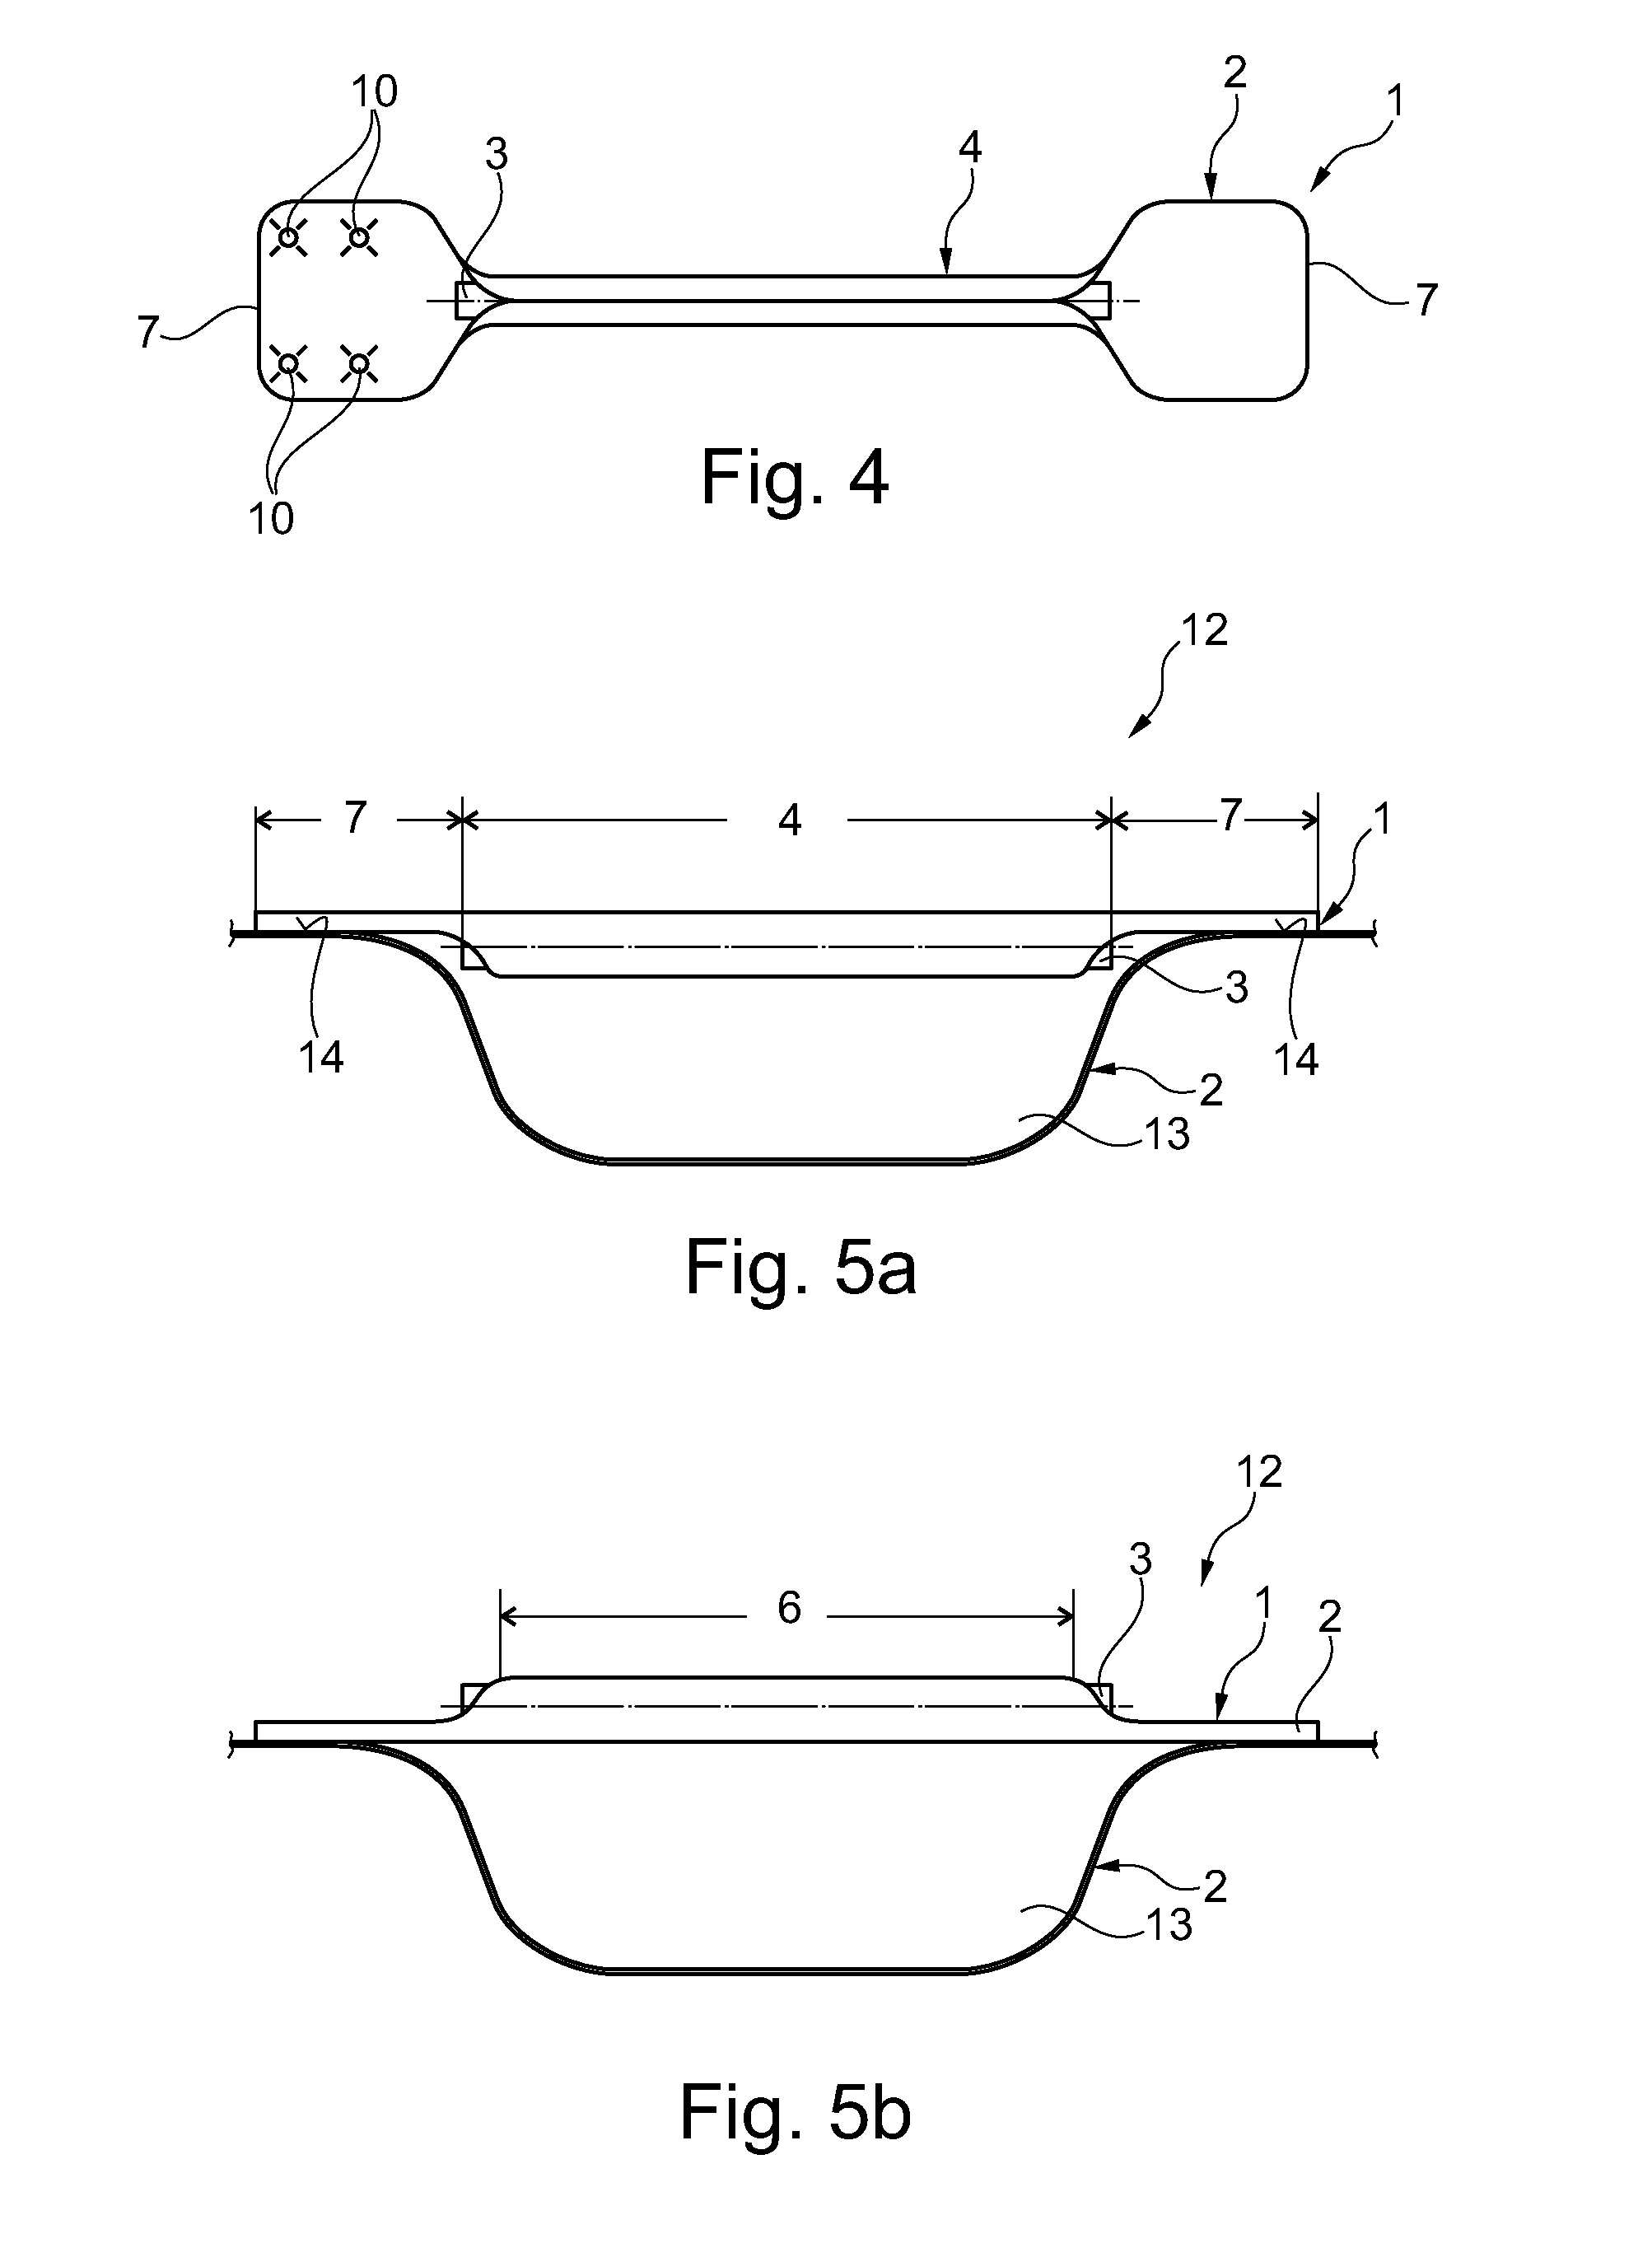 Sheet metal bracket with reinforcing core rod